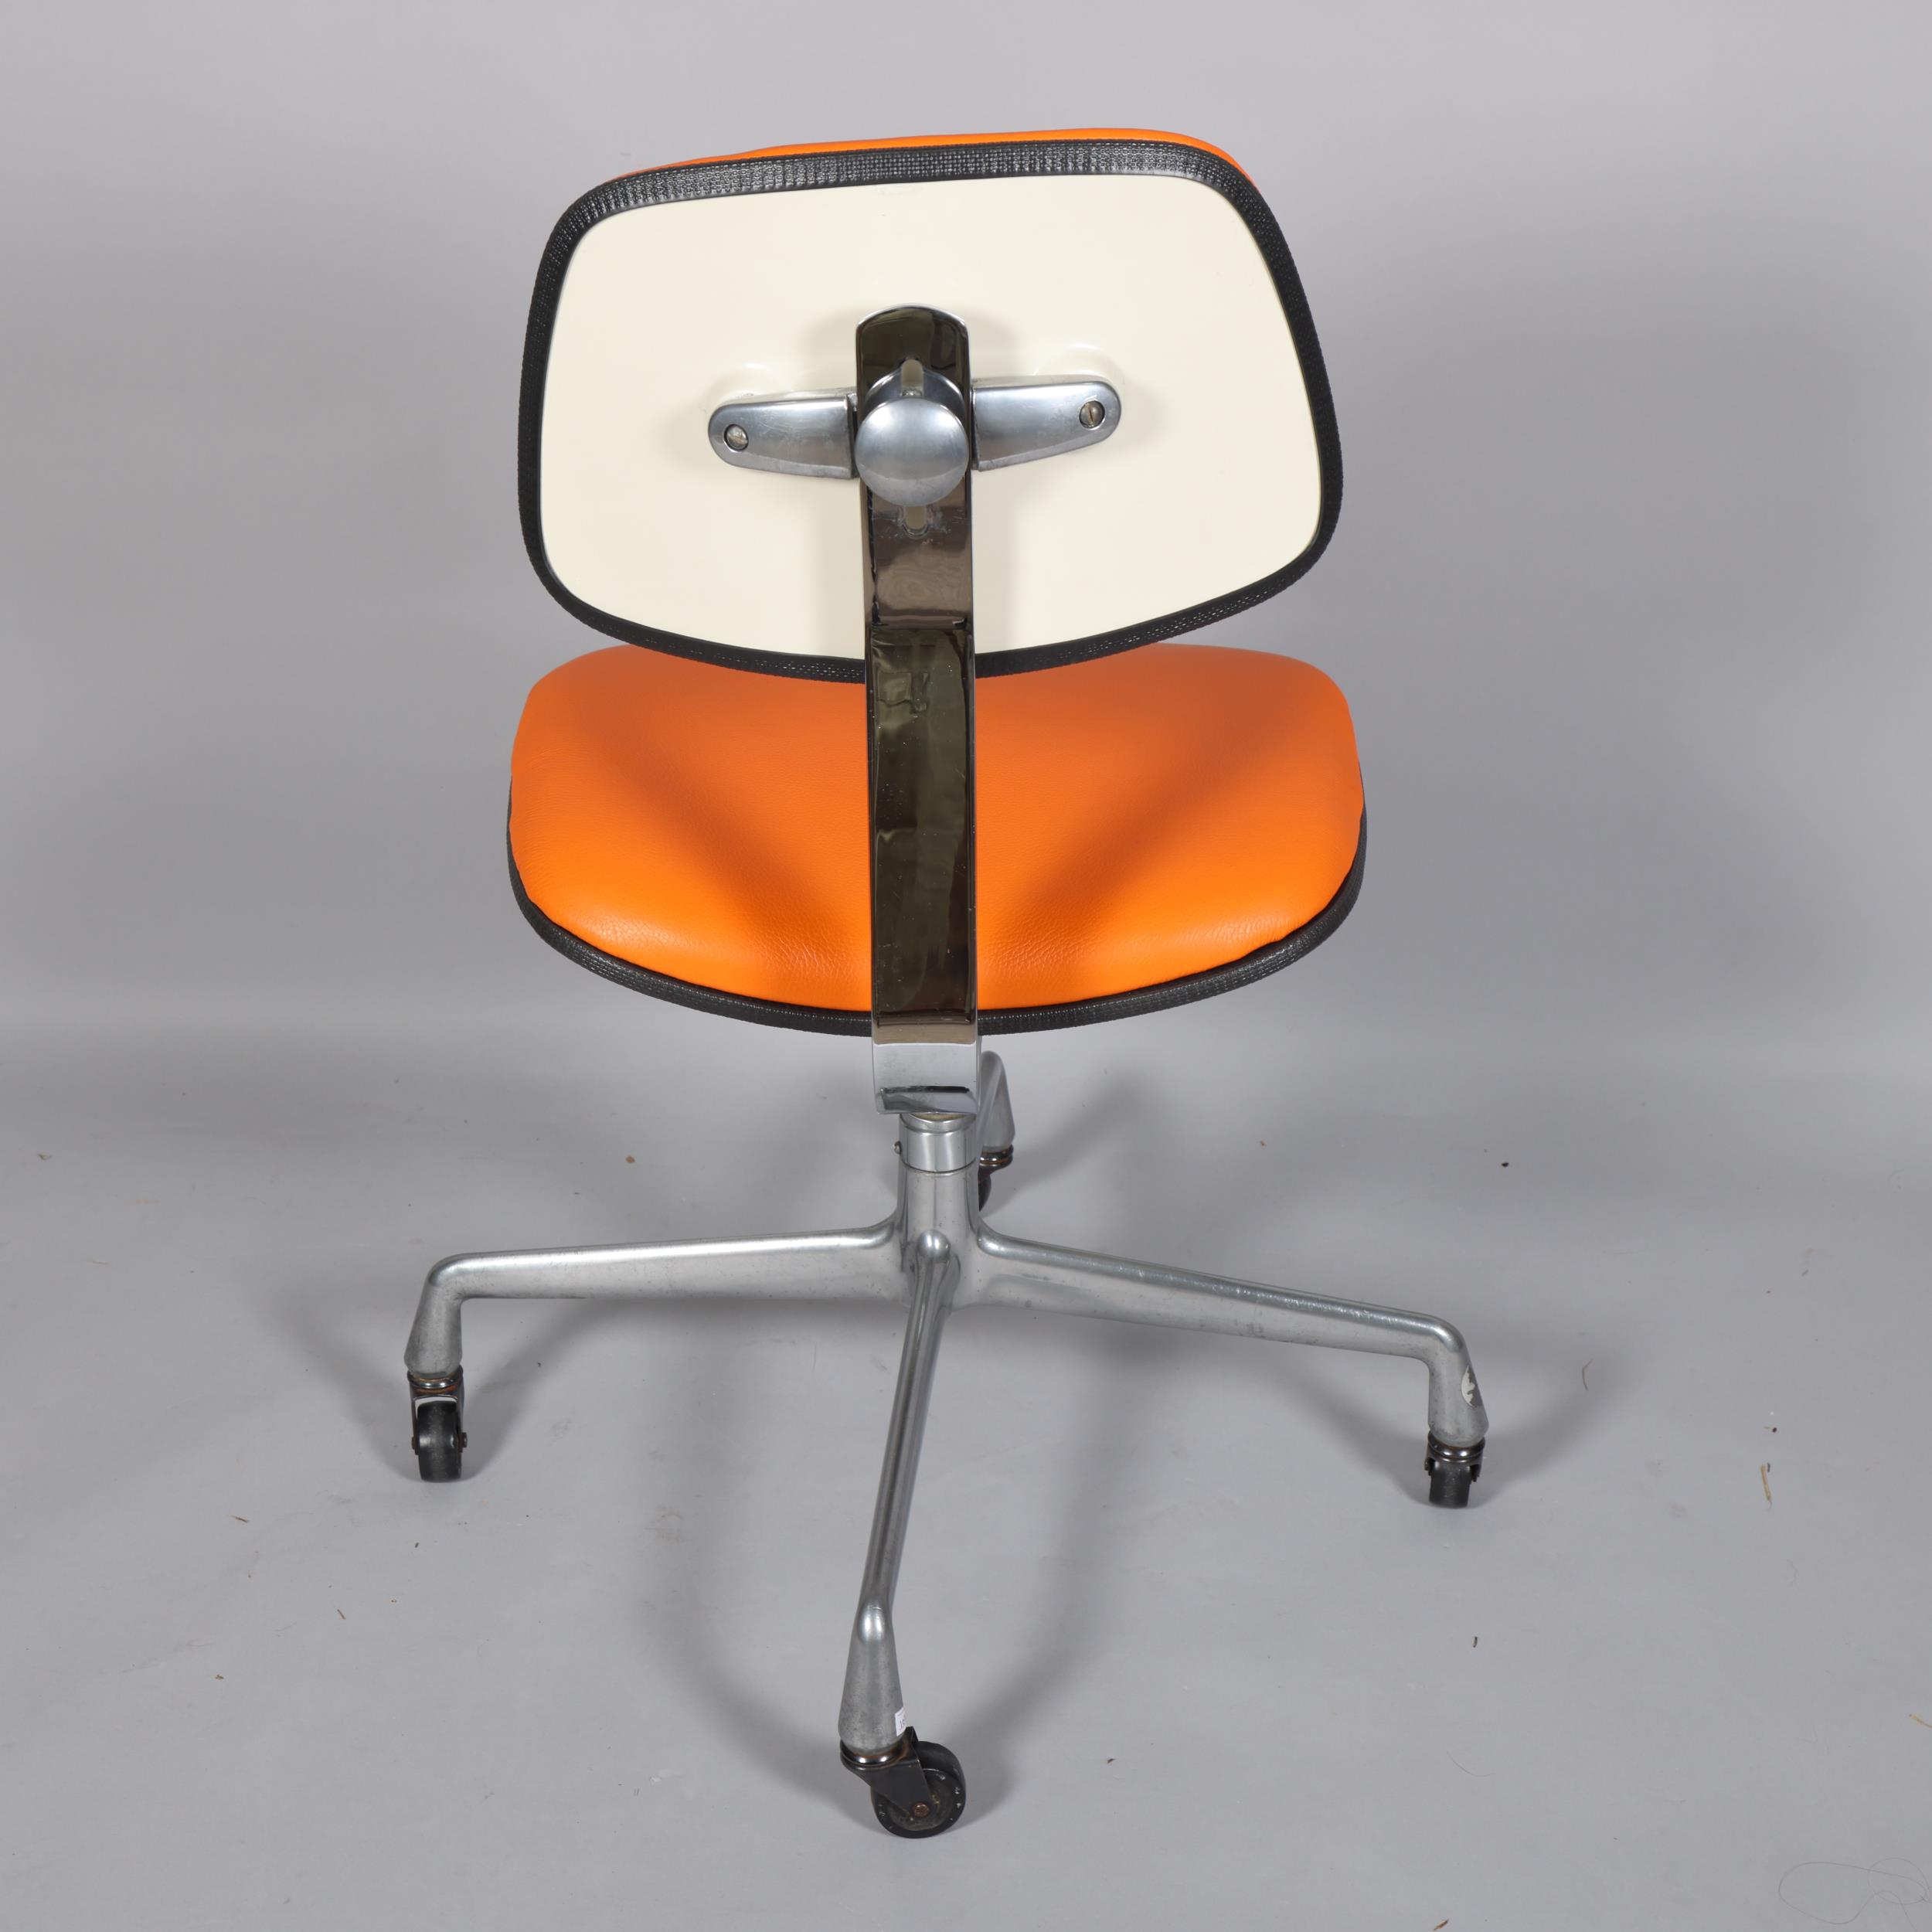 CHARLES EAMES, a rare Herman Miller EC228 secretarial chair, 1971, with orange leather upholstery, - Image 2 of 3